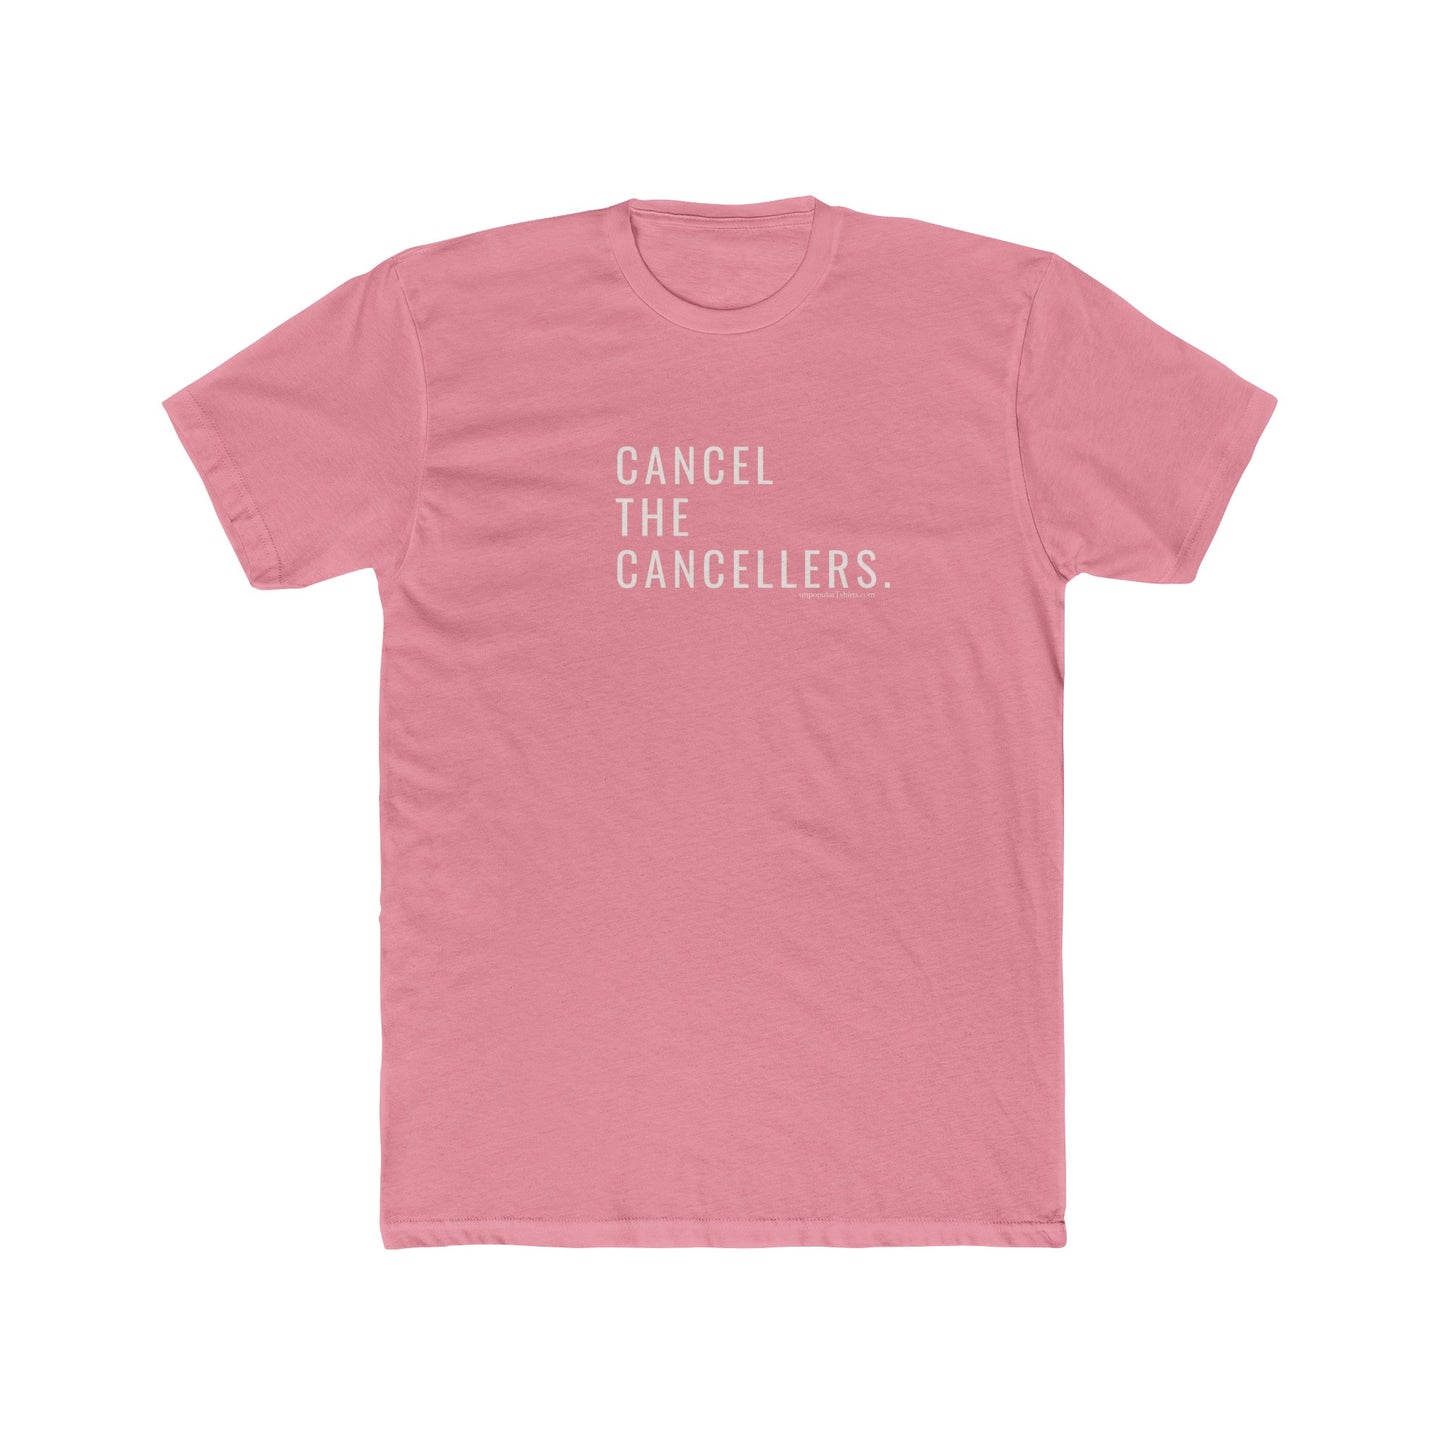 Cancel the Cancellers - Ultra Soft Tee